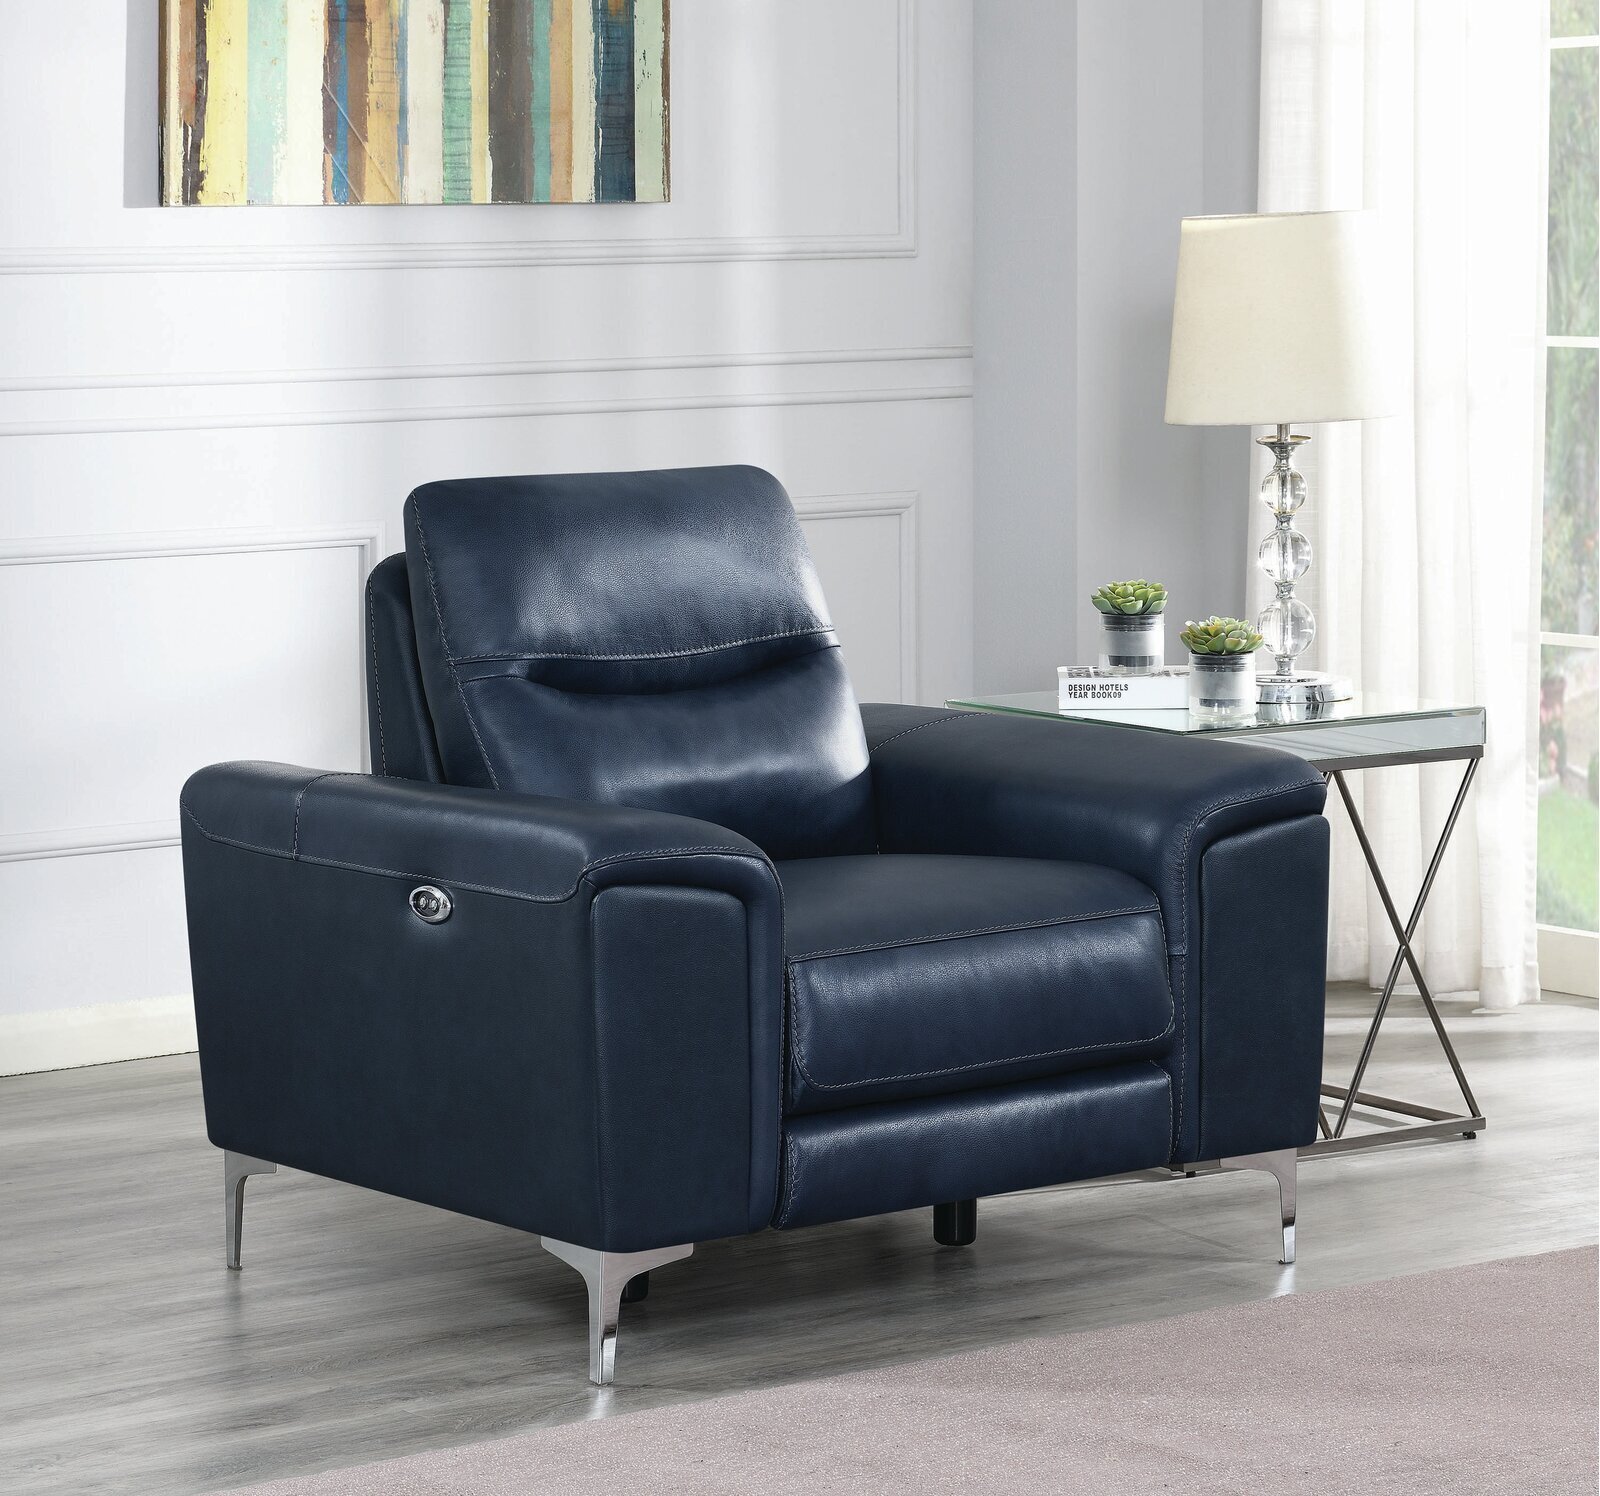 Extra Wide Sleek Leather Recliner